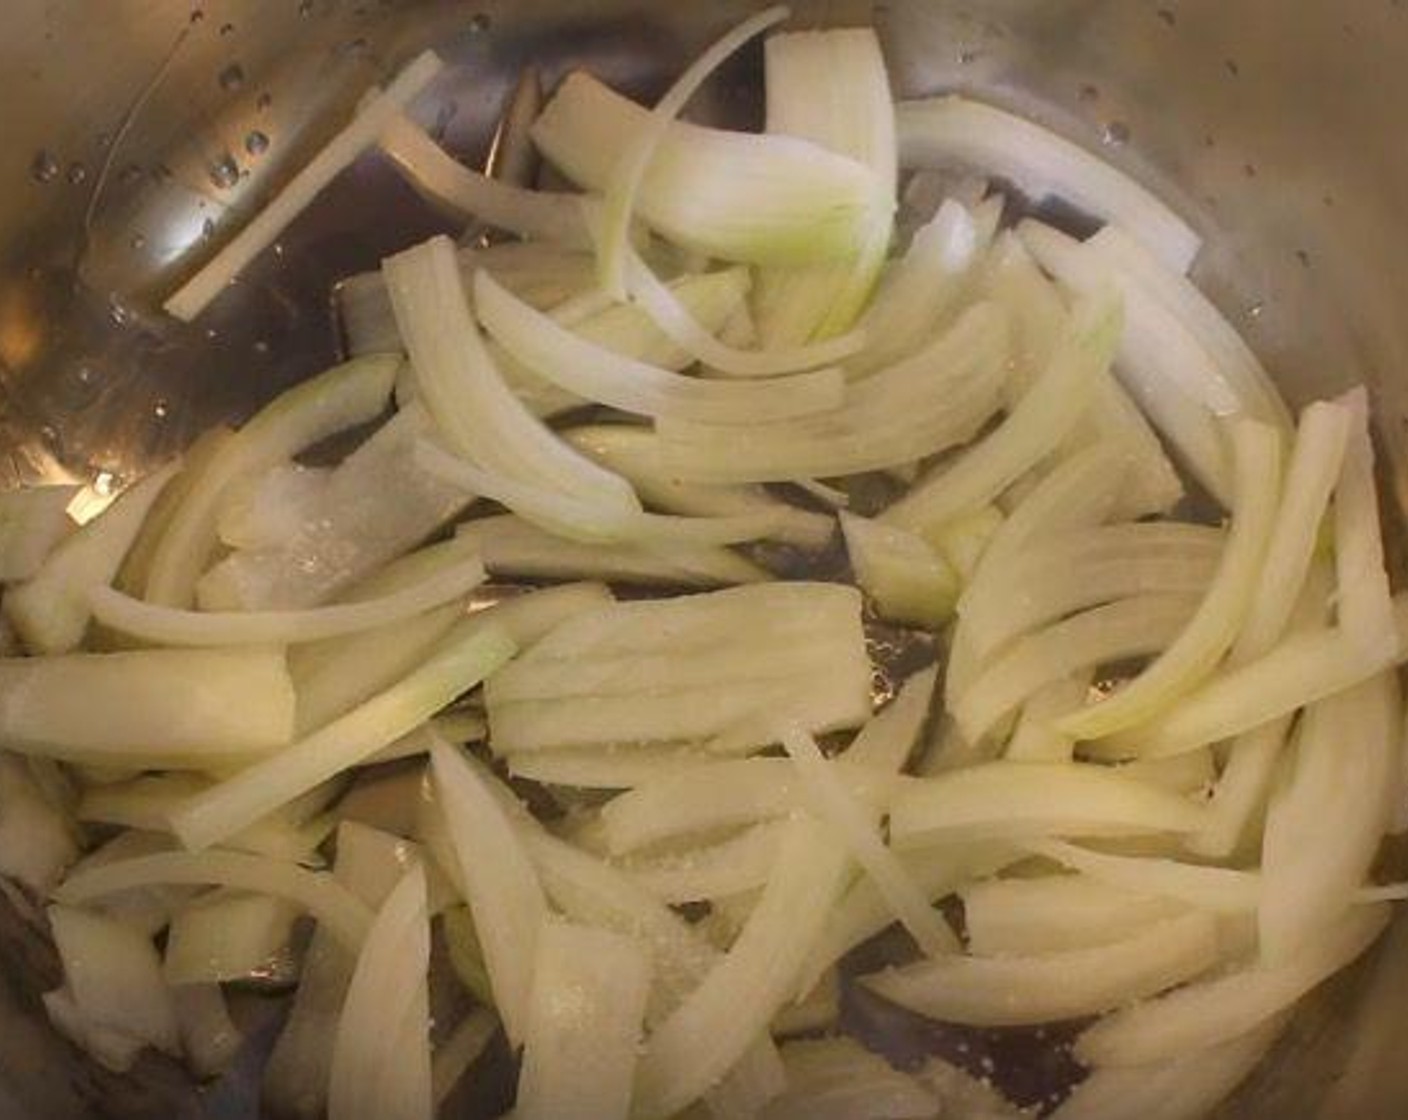 step 1 In a saucepan over low heat, add Vegetable Oil (1 Tbsp) and Onion (1). Season with Onion Powder (1/2 tsp). Cook for 20 minutes, or until onions have softened.